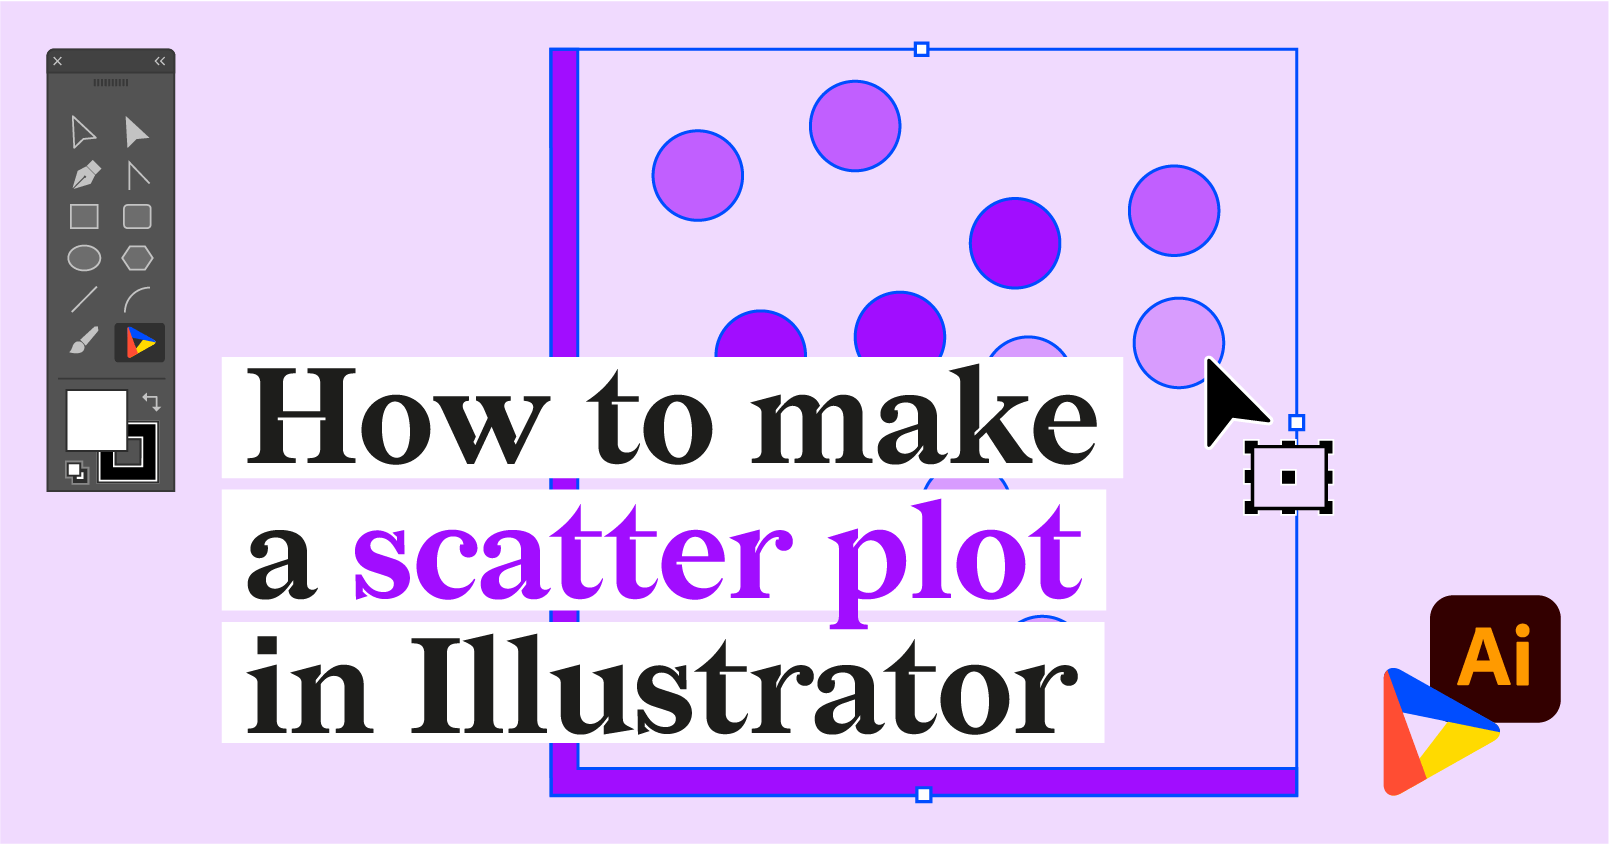 Learn how to create your own scatterplot in Adobe lllustrator with Datylon for Illustrator chart maker plug-in